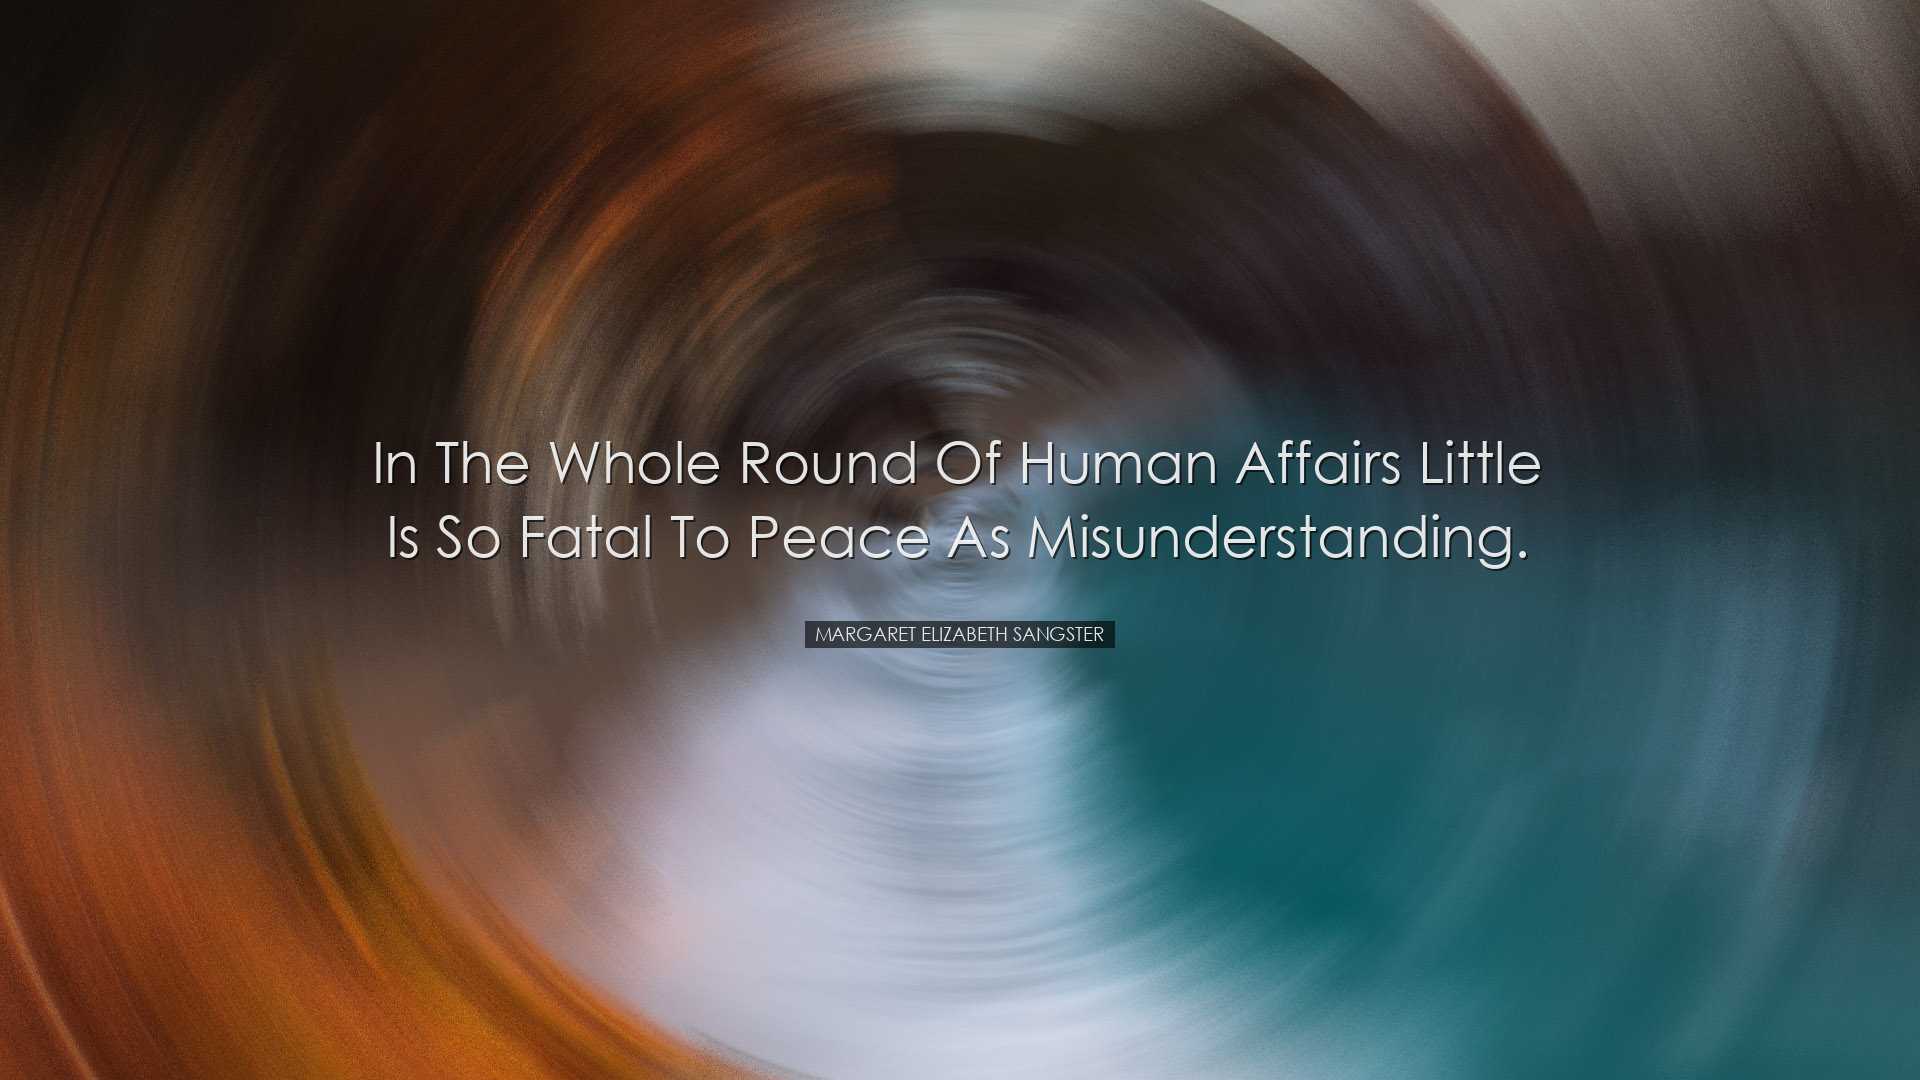 In the whole round of human affairs little is so fatal to peace as